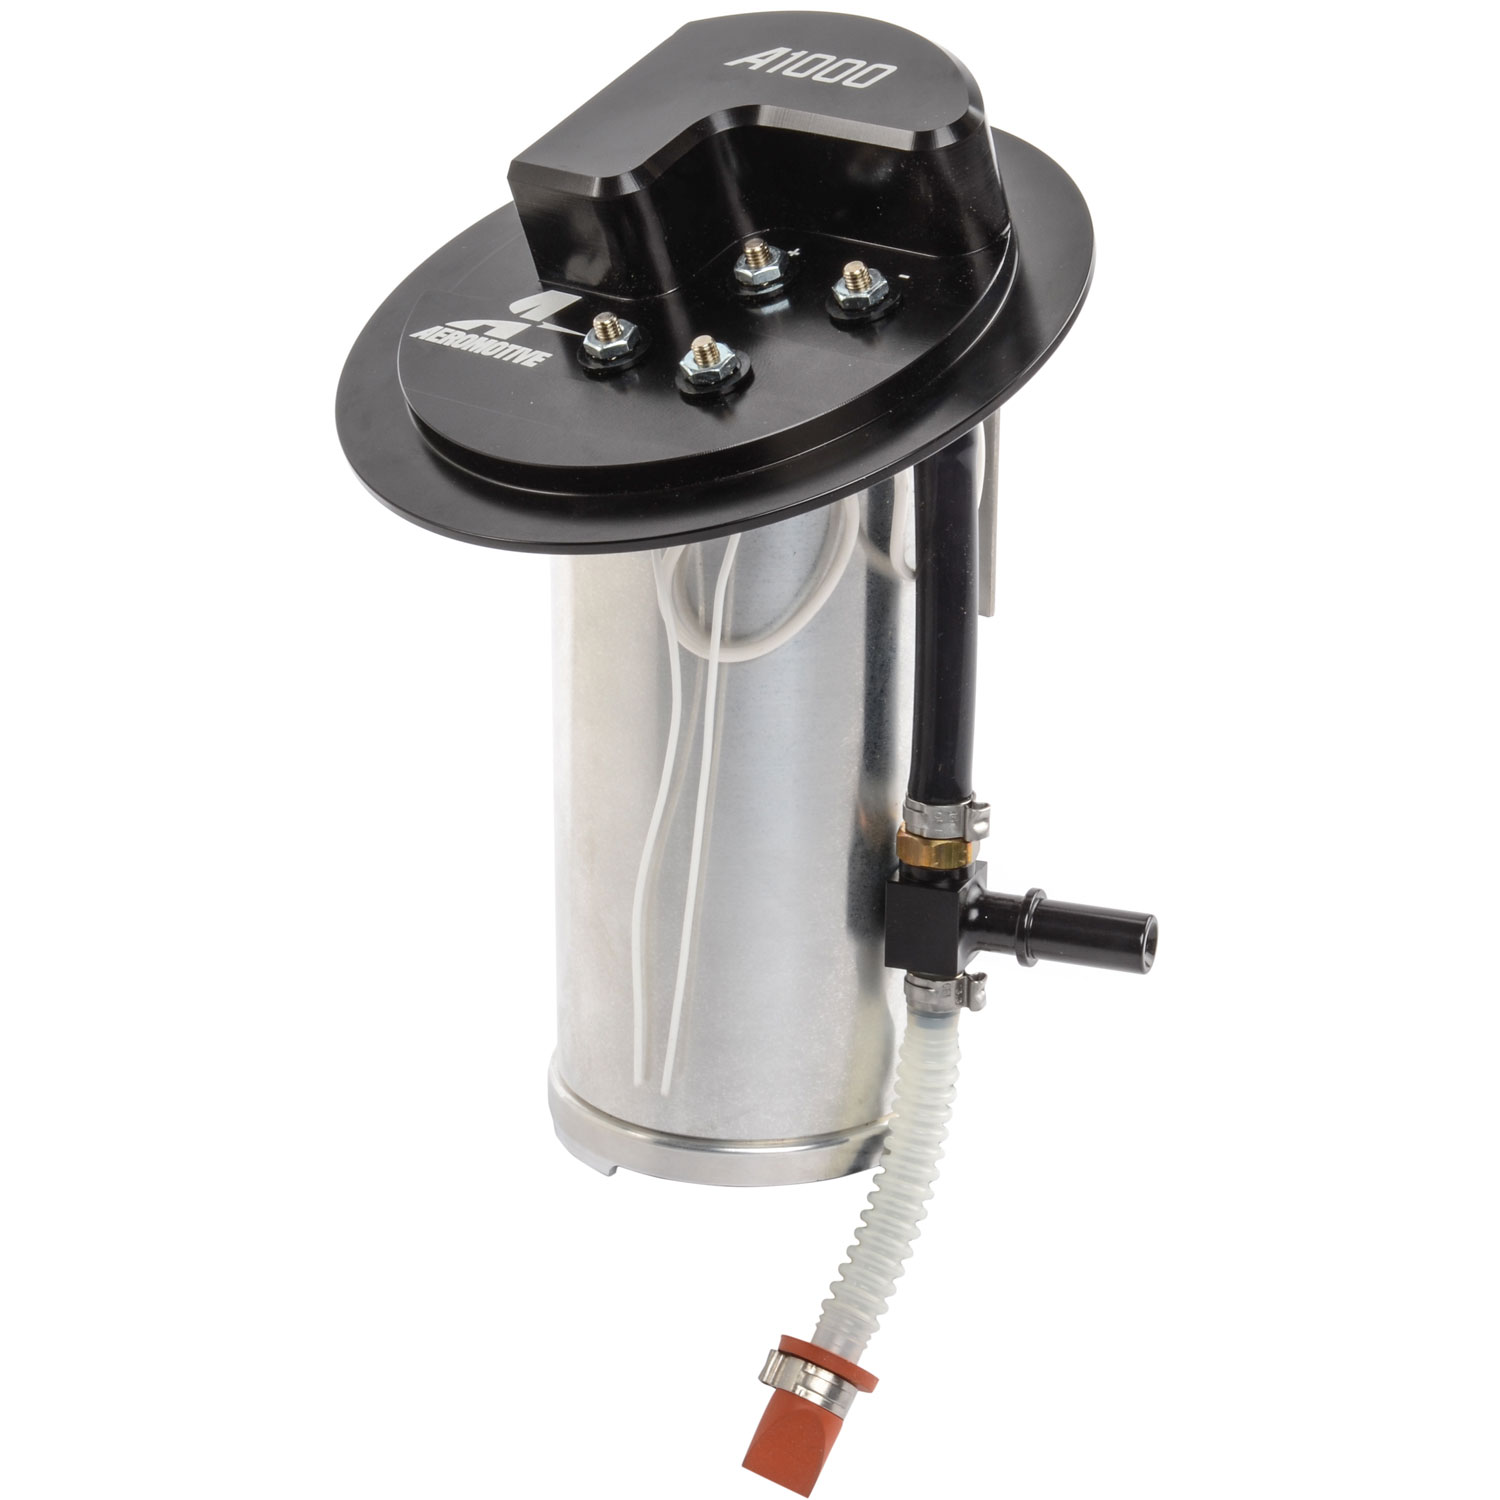 Aeromotive Fuel Pump, Ford, 2010-2013 Mustang, A1000